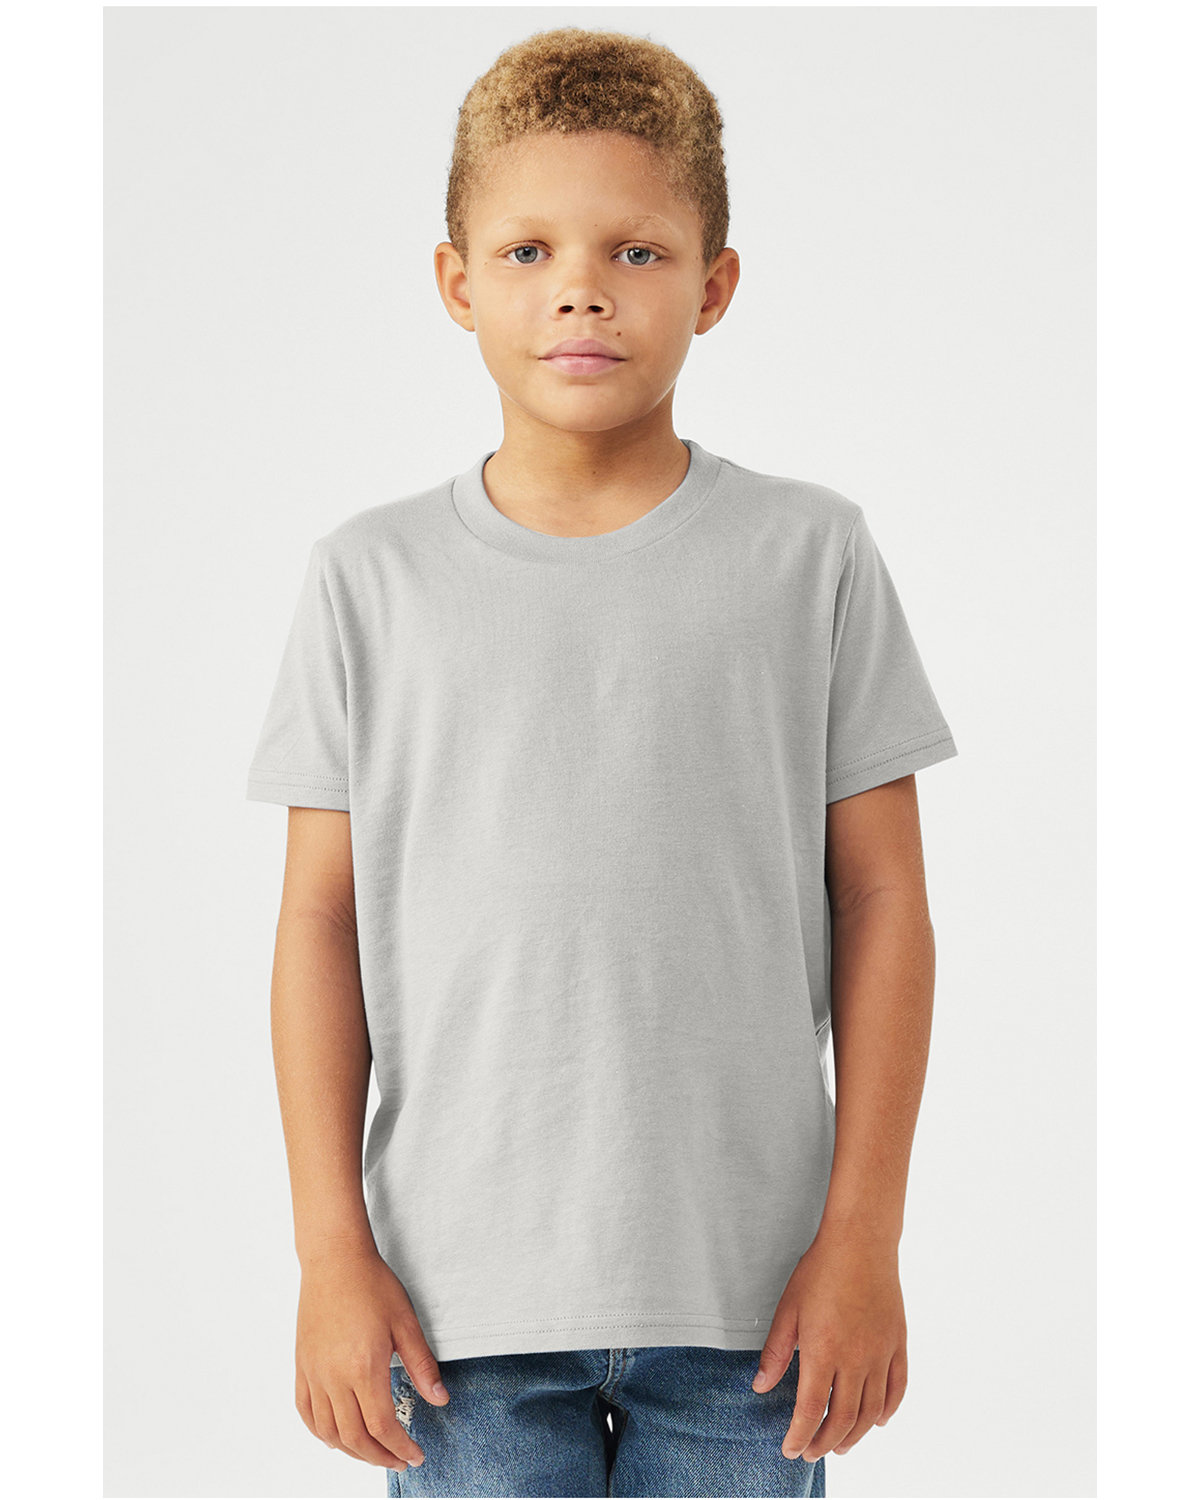 Bella + Canvas Youth Jersey T-Shirt SILVER 